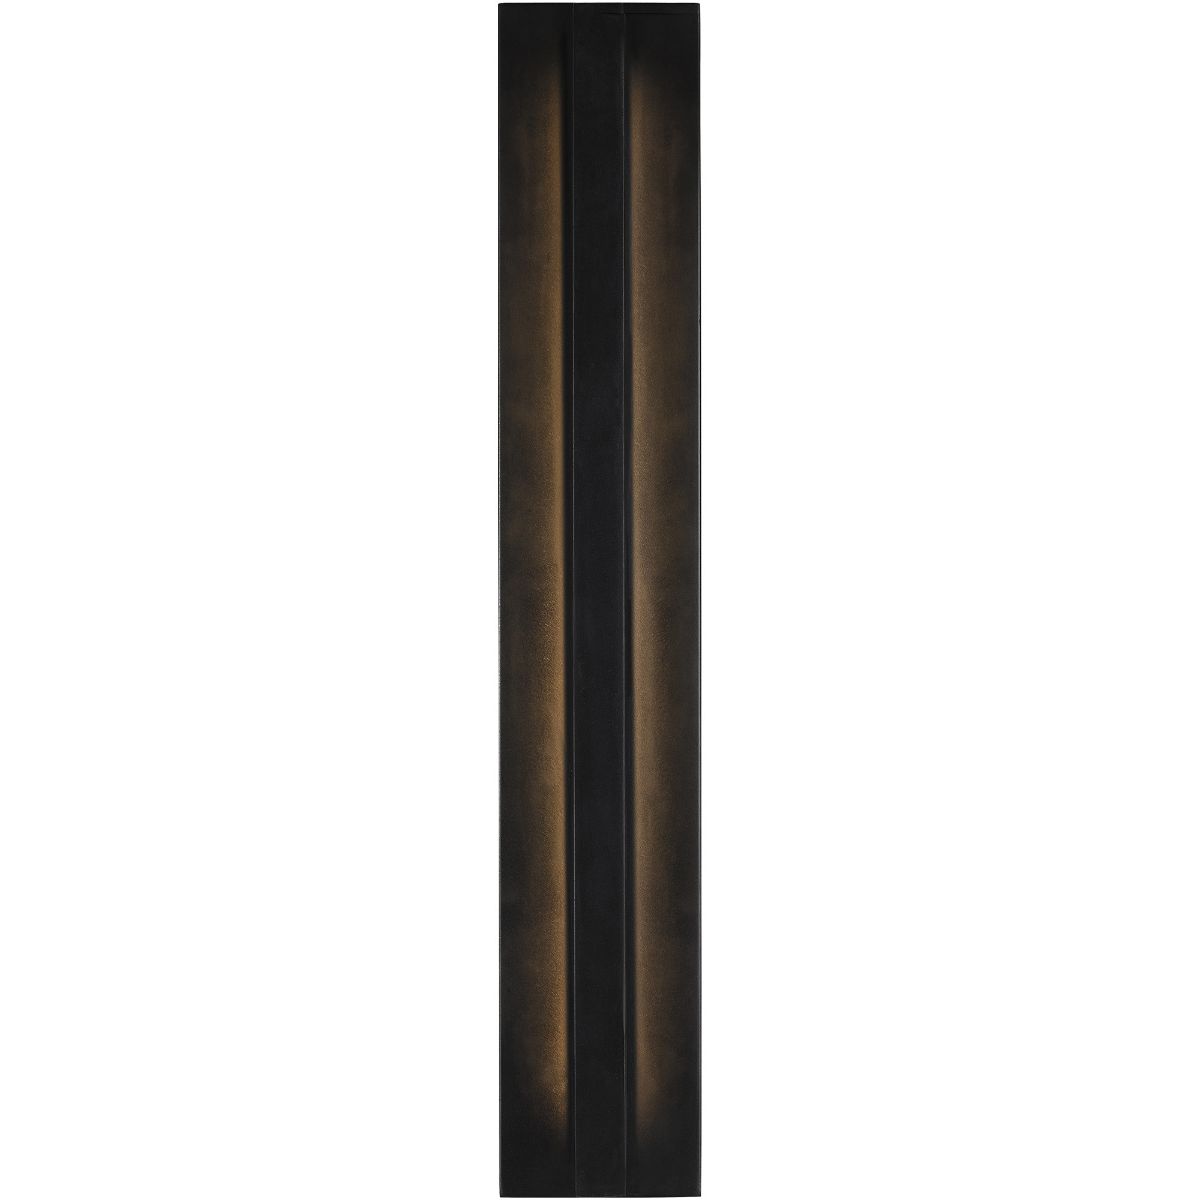 Anton 24 in. LED Wall Sconce Black finish